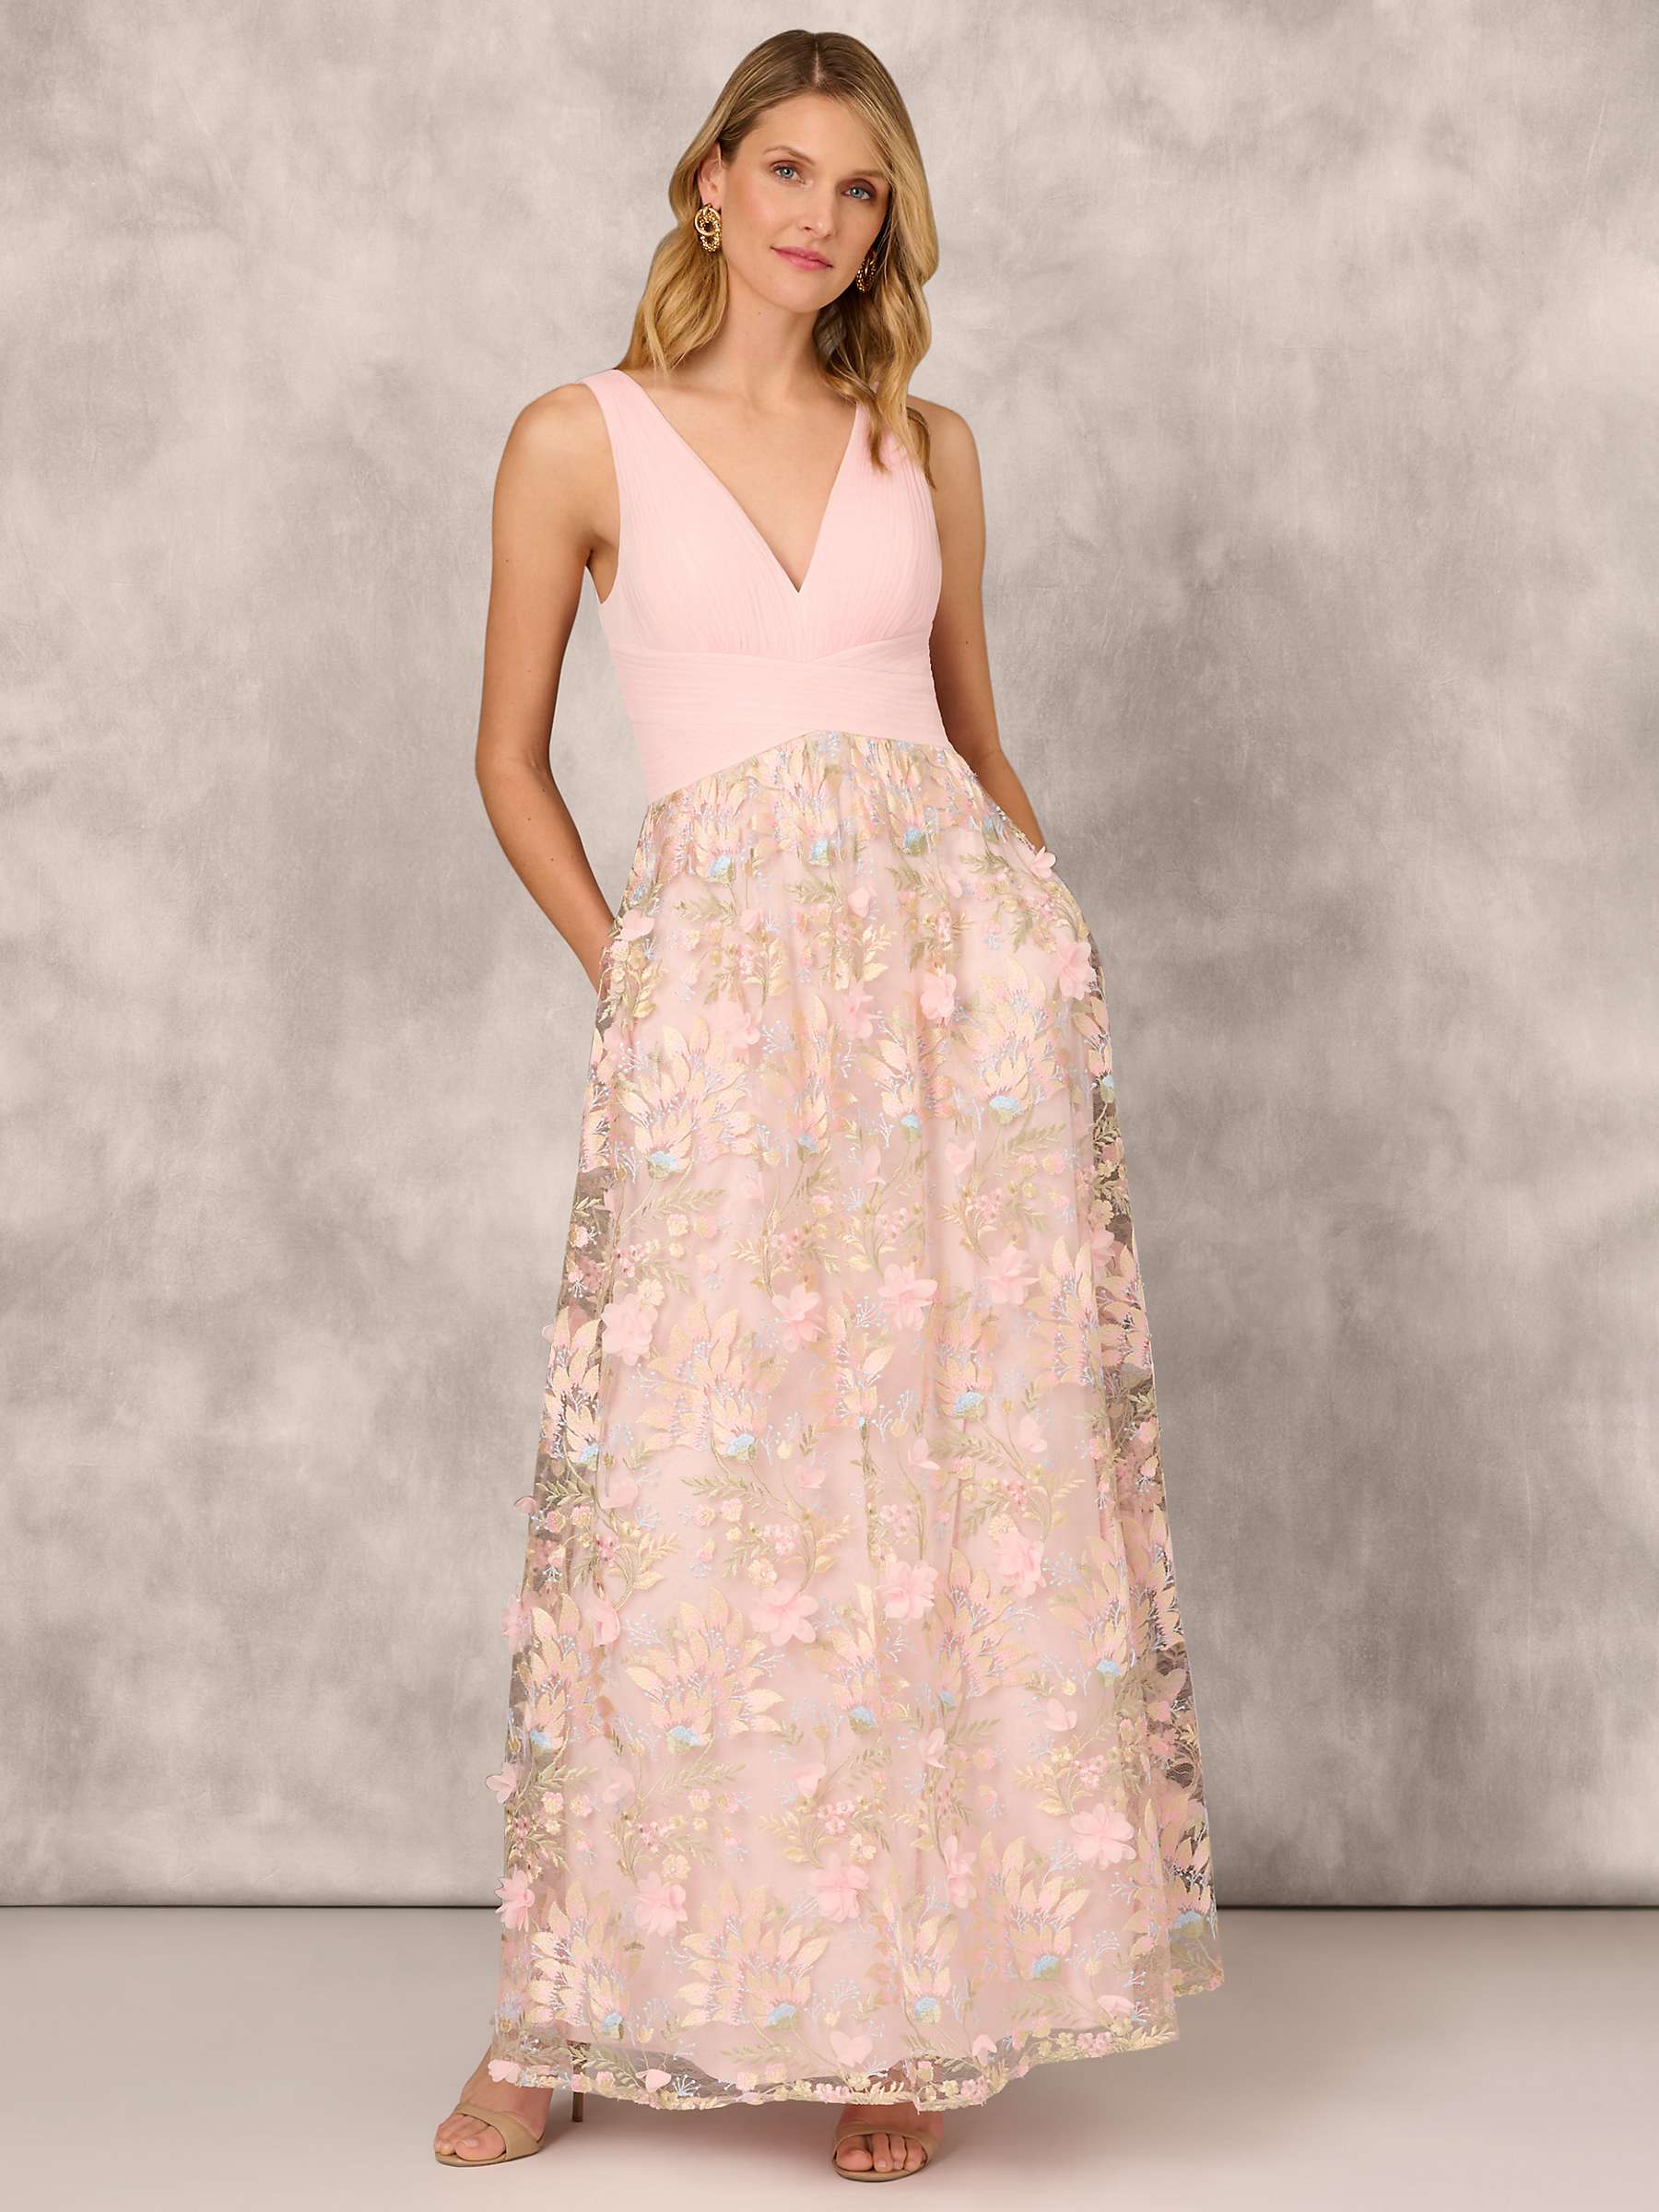 Buy Aidan Mattox by Adrianna Papell Embroidered Mesh Maxi Dress, Pink/Multi Online at johnlewis.com